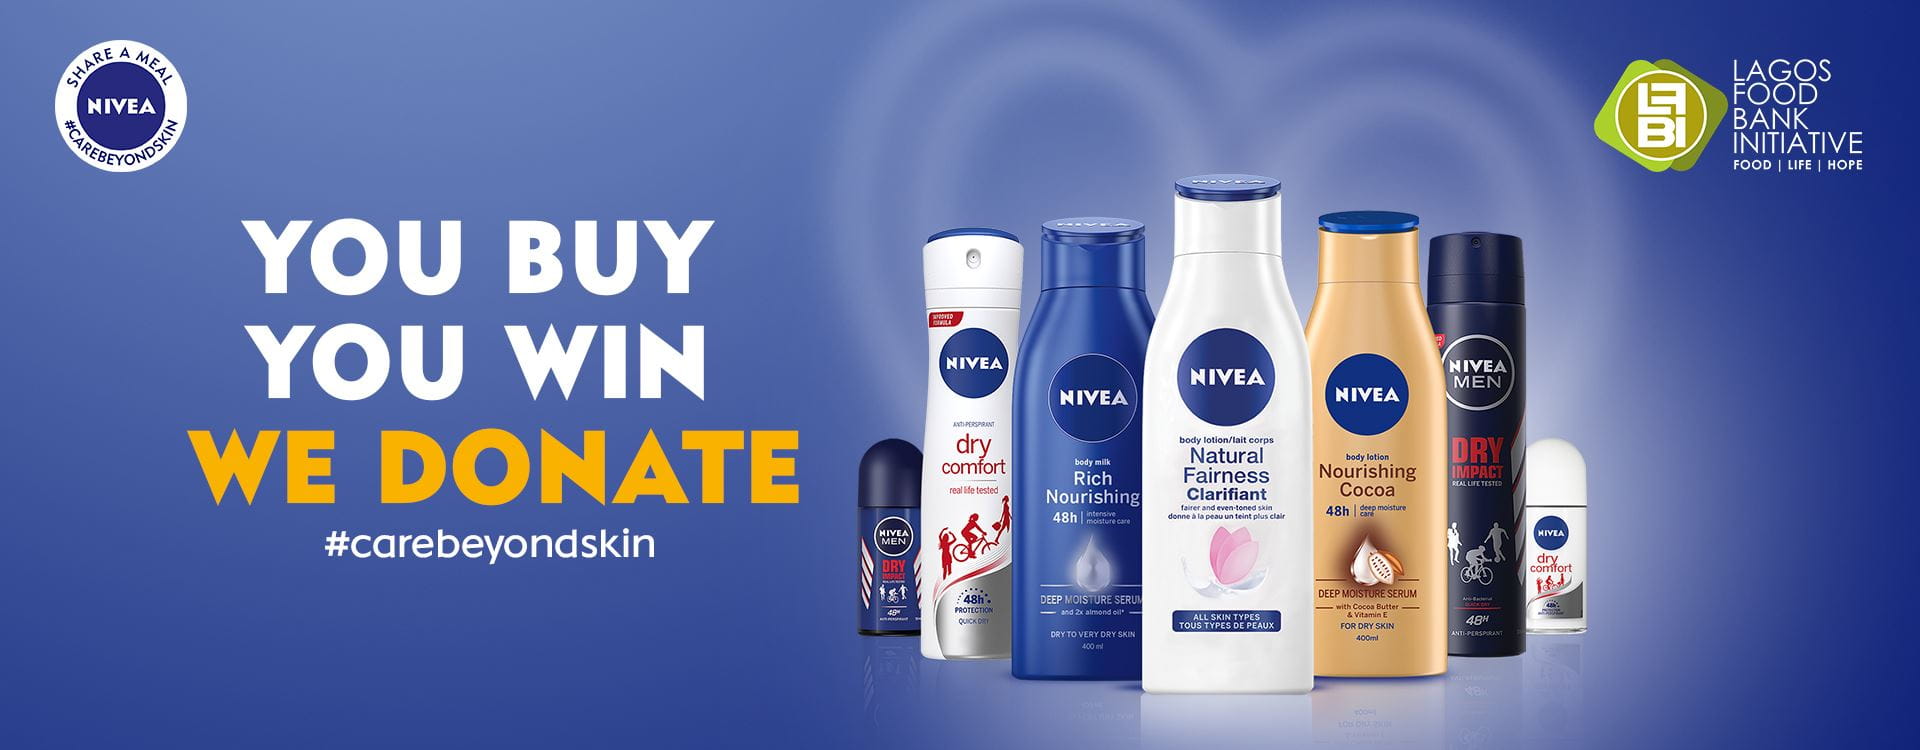  Care Beyond Skin - You Buy, You WIn, We Donate